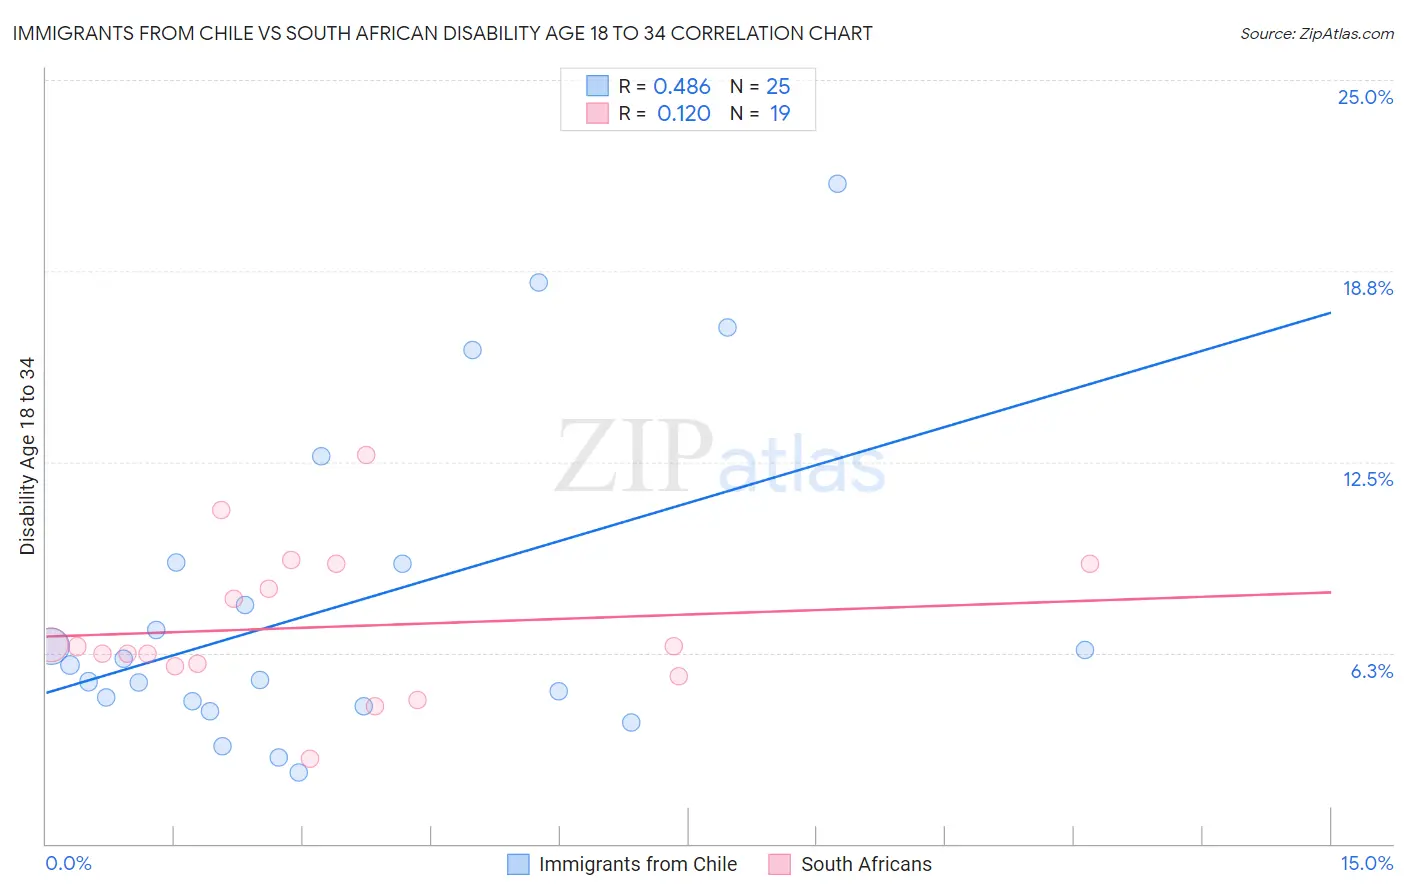 Immigrants from Chile vs South African Disability Age 18 to 34